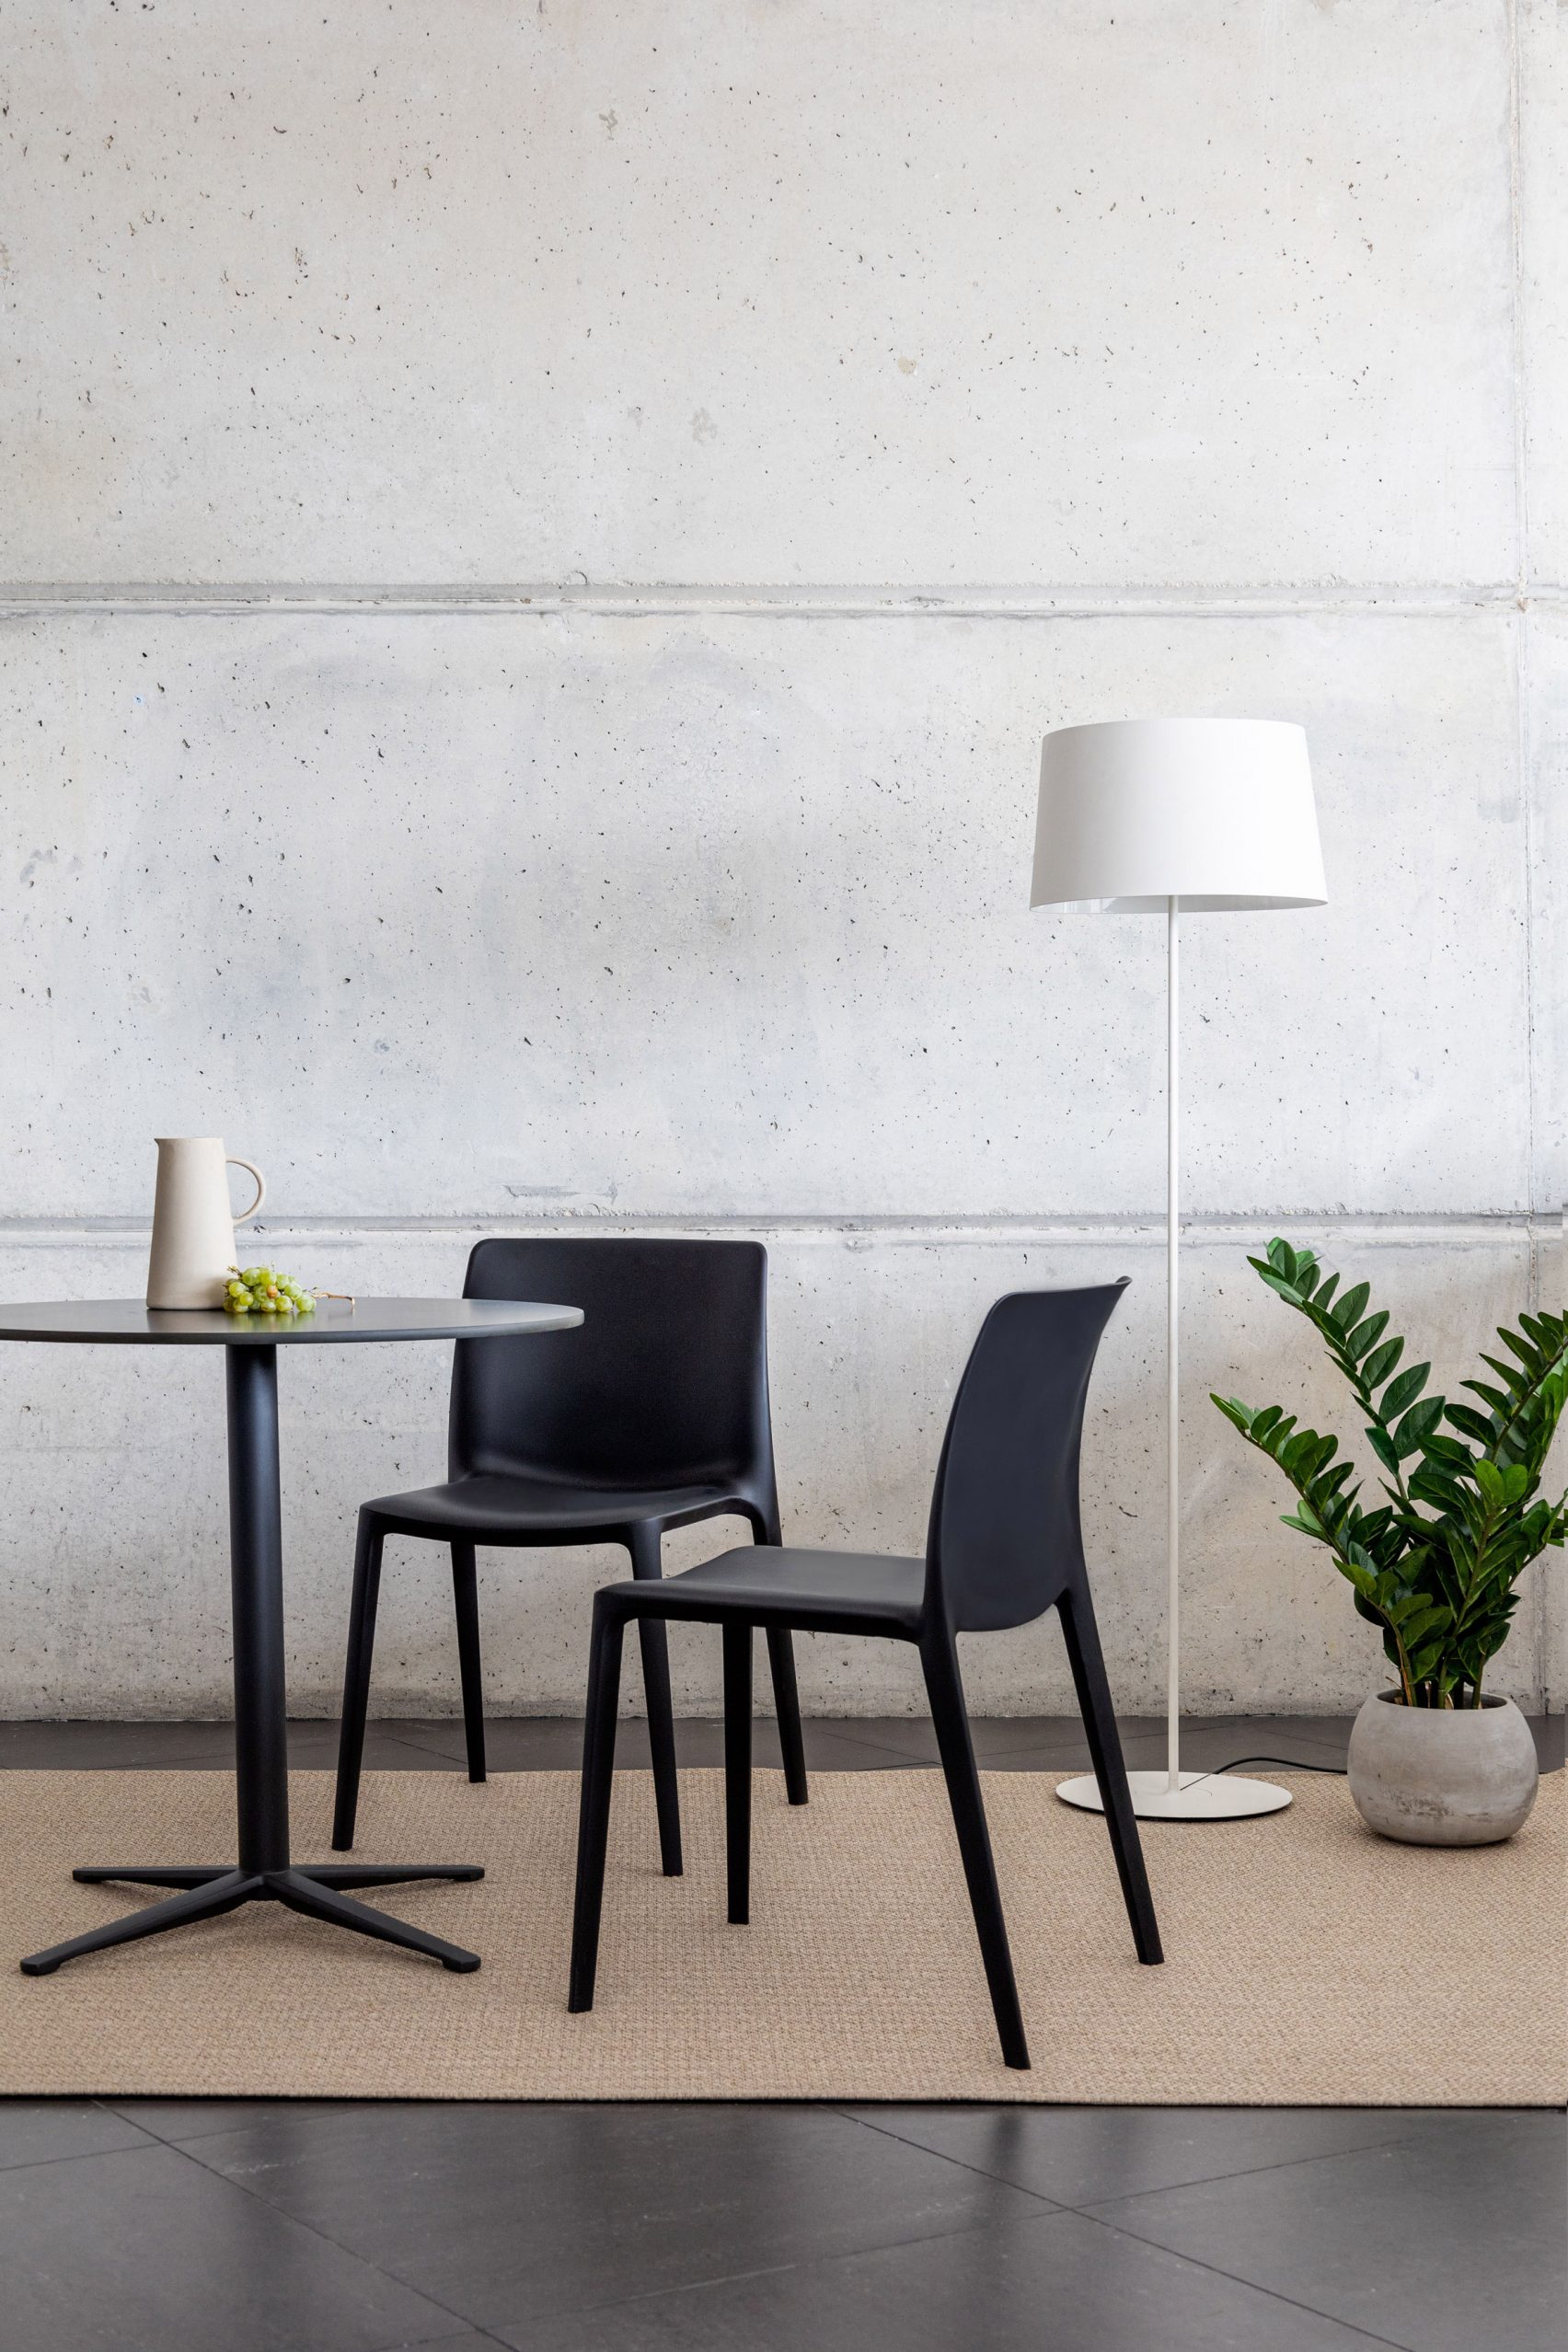 Two black Fluit chairs by Actiu next to a table, plant and lamp